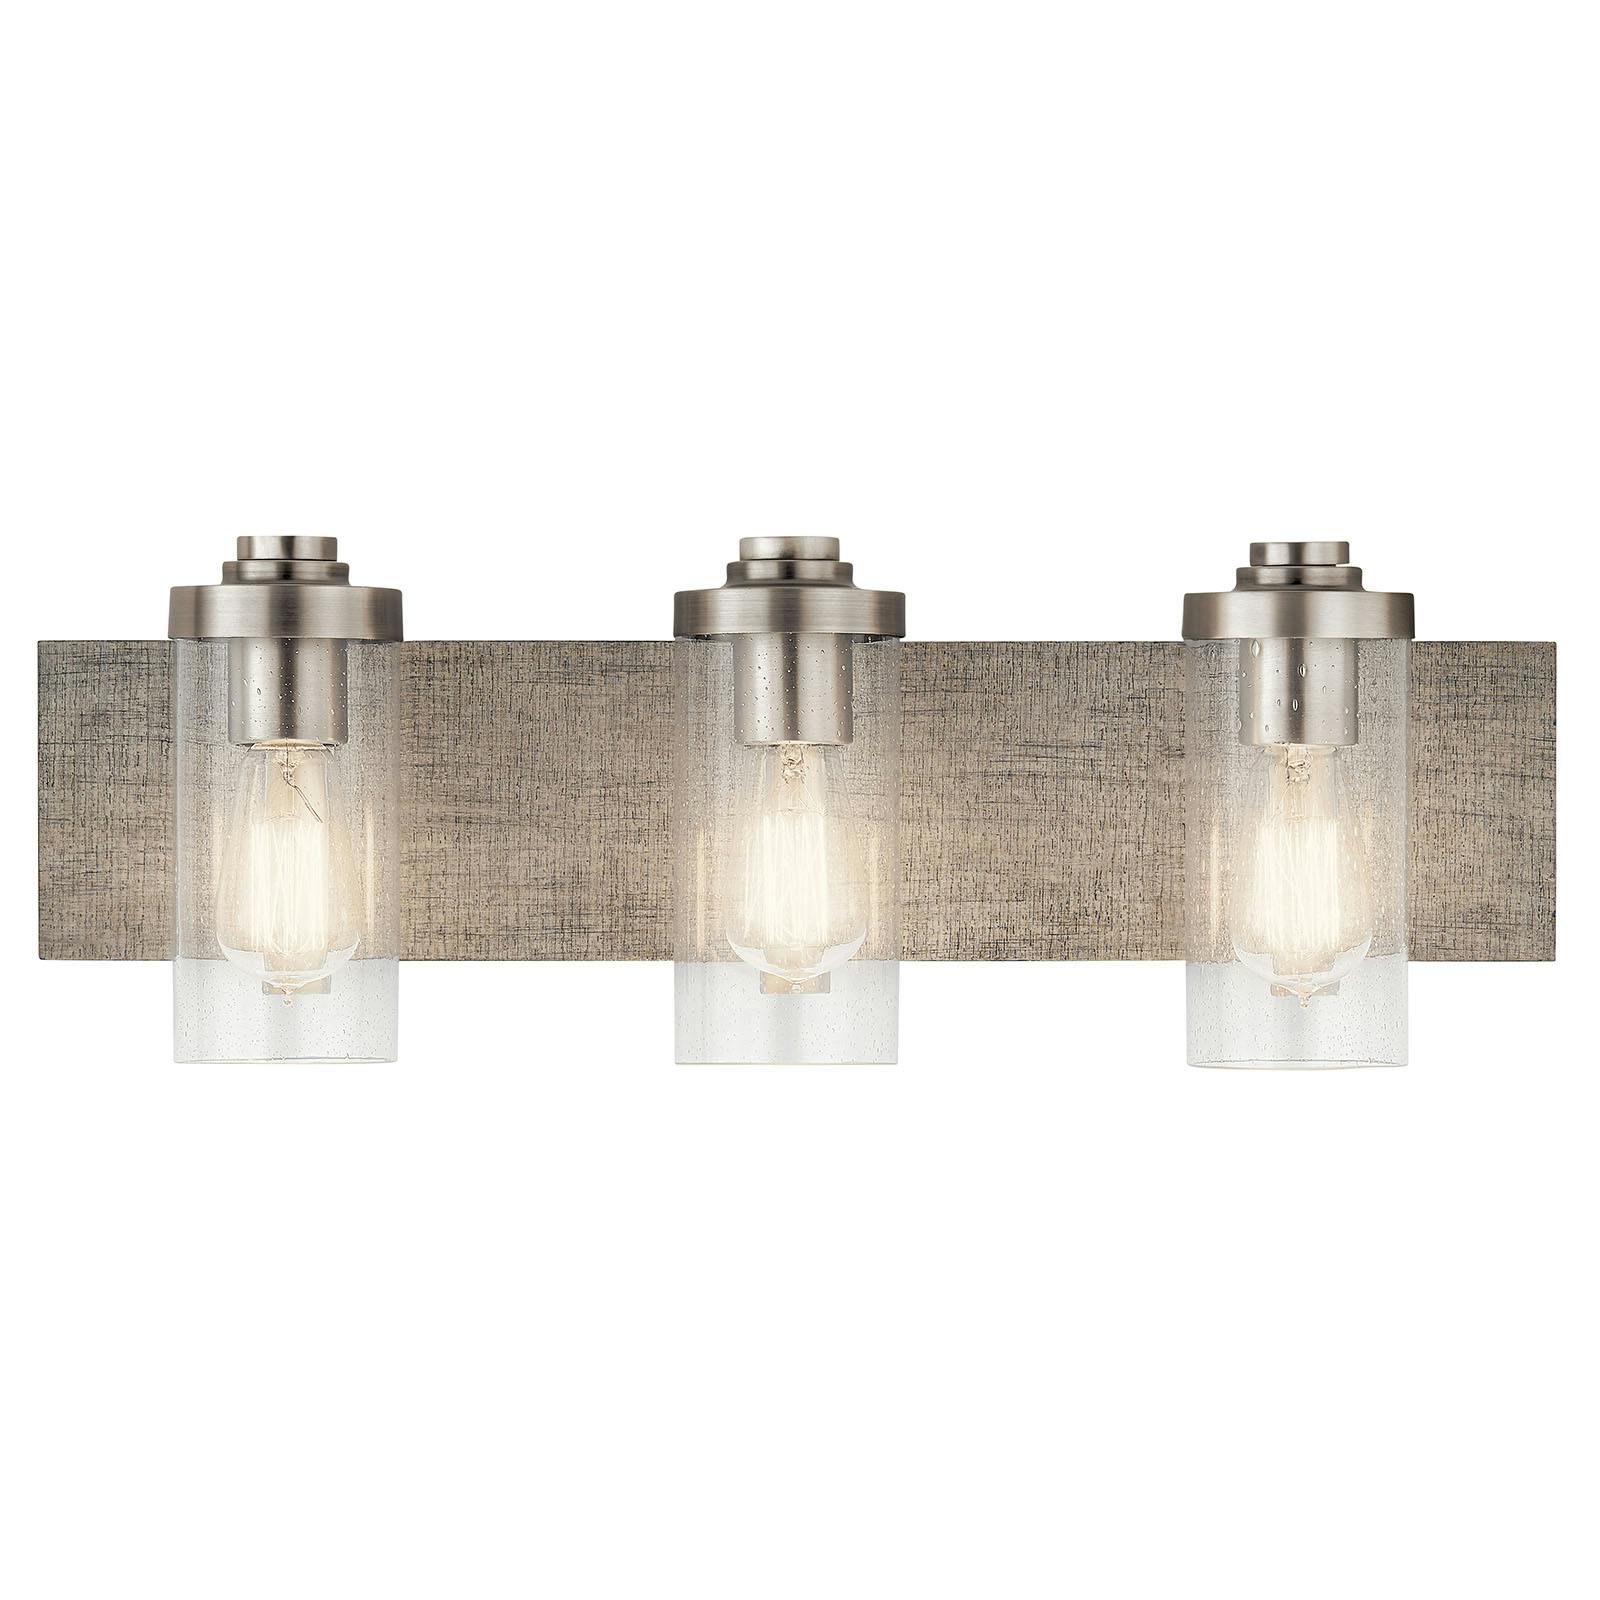 The The Dalwood 24" Vanity Light in Pewter facing down on a white background